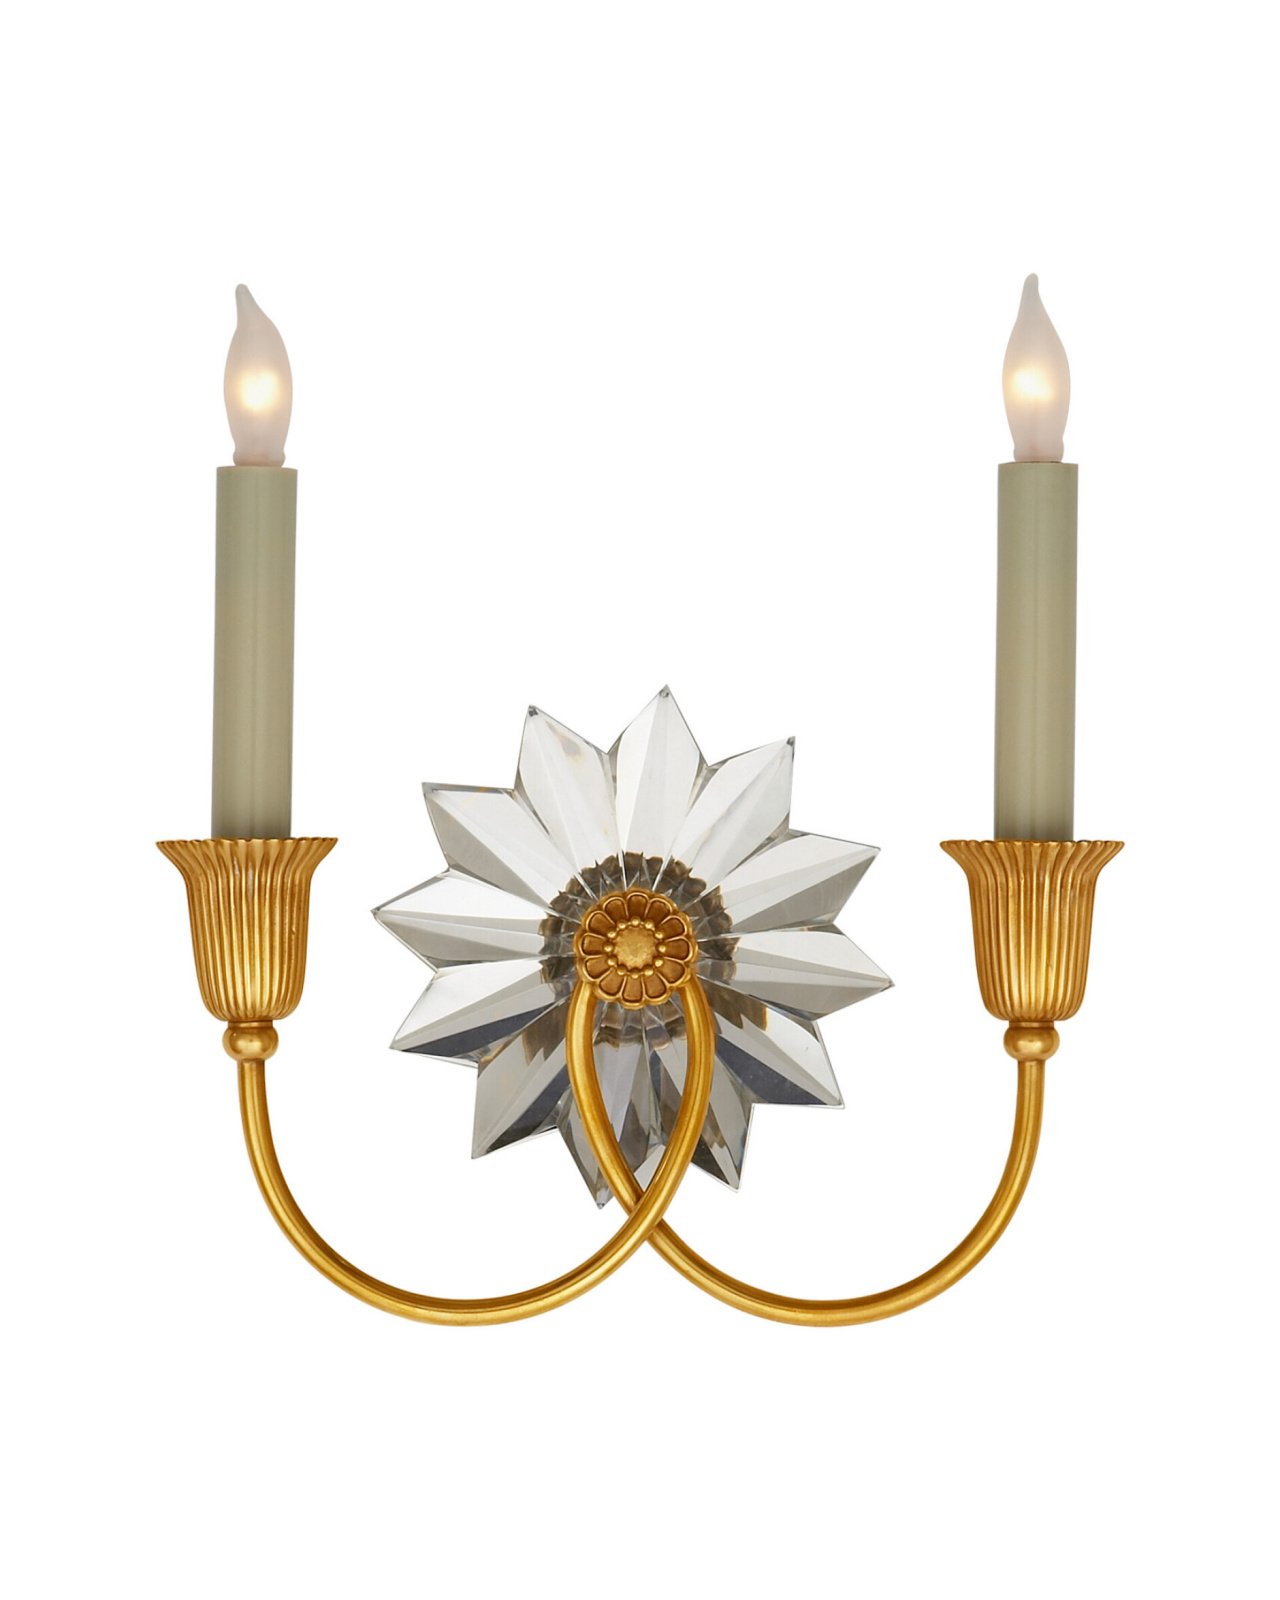 Huntington Crystal Double Sconce Antique Brass